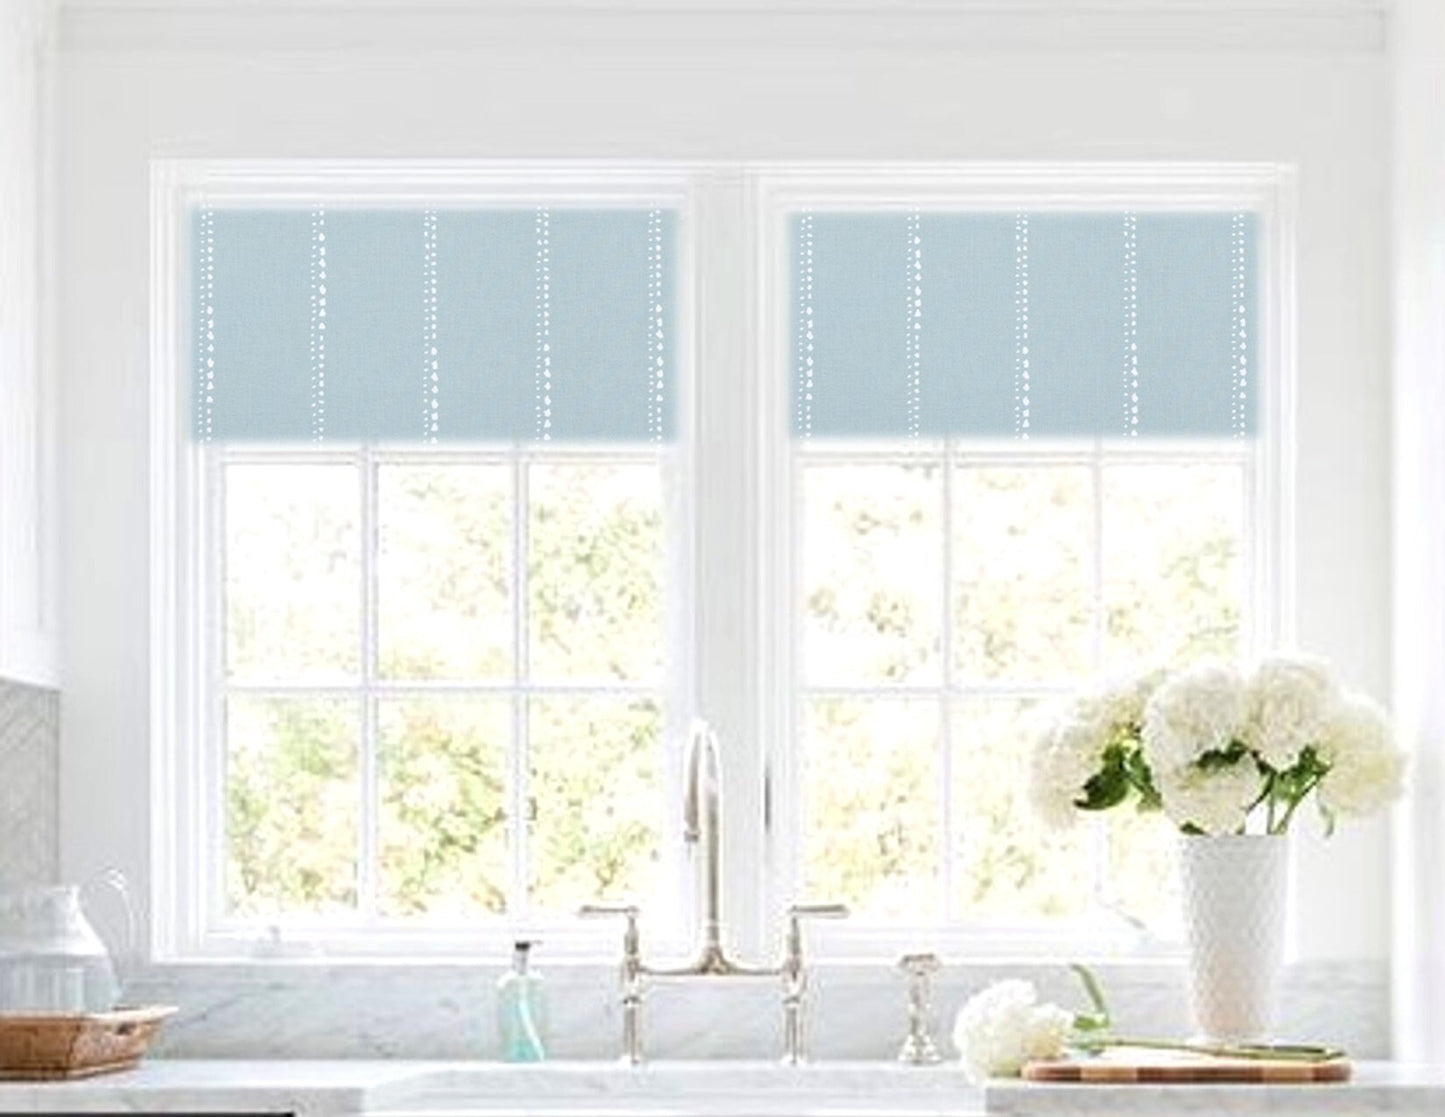 Straight Custom Valance in Dotted White Stripe on Spa Blue Fabric, 100% Cotton, Fully Lined, Custom Made valance window treatments